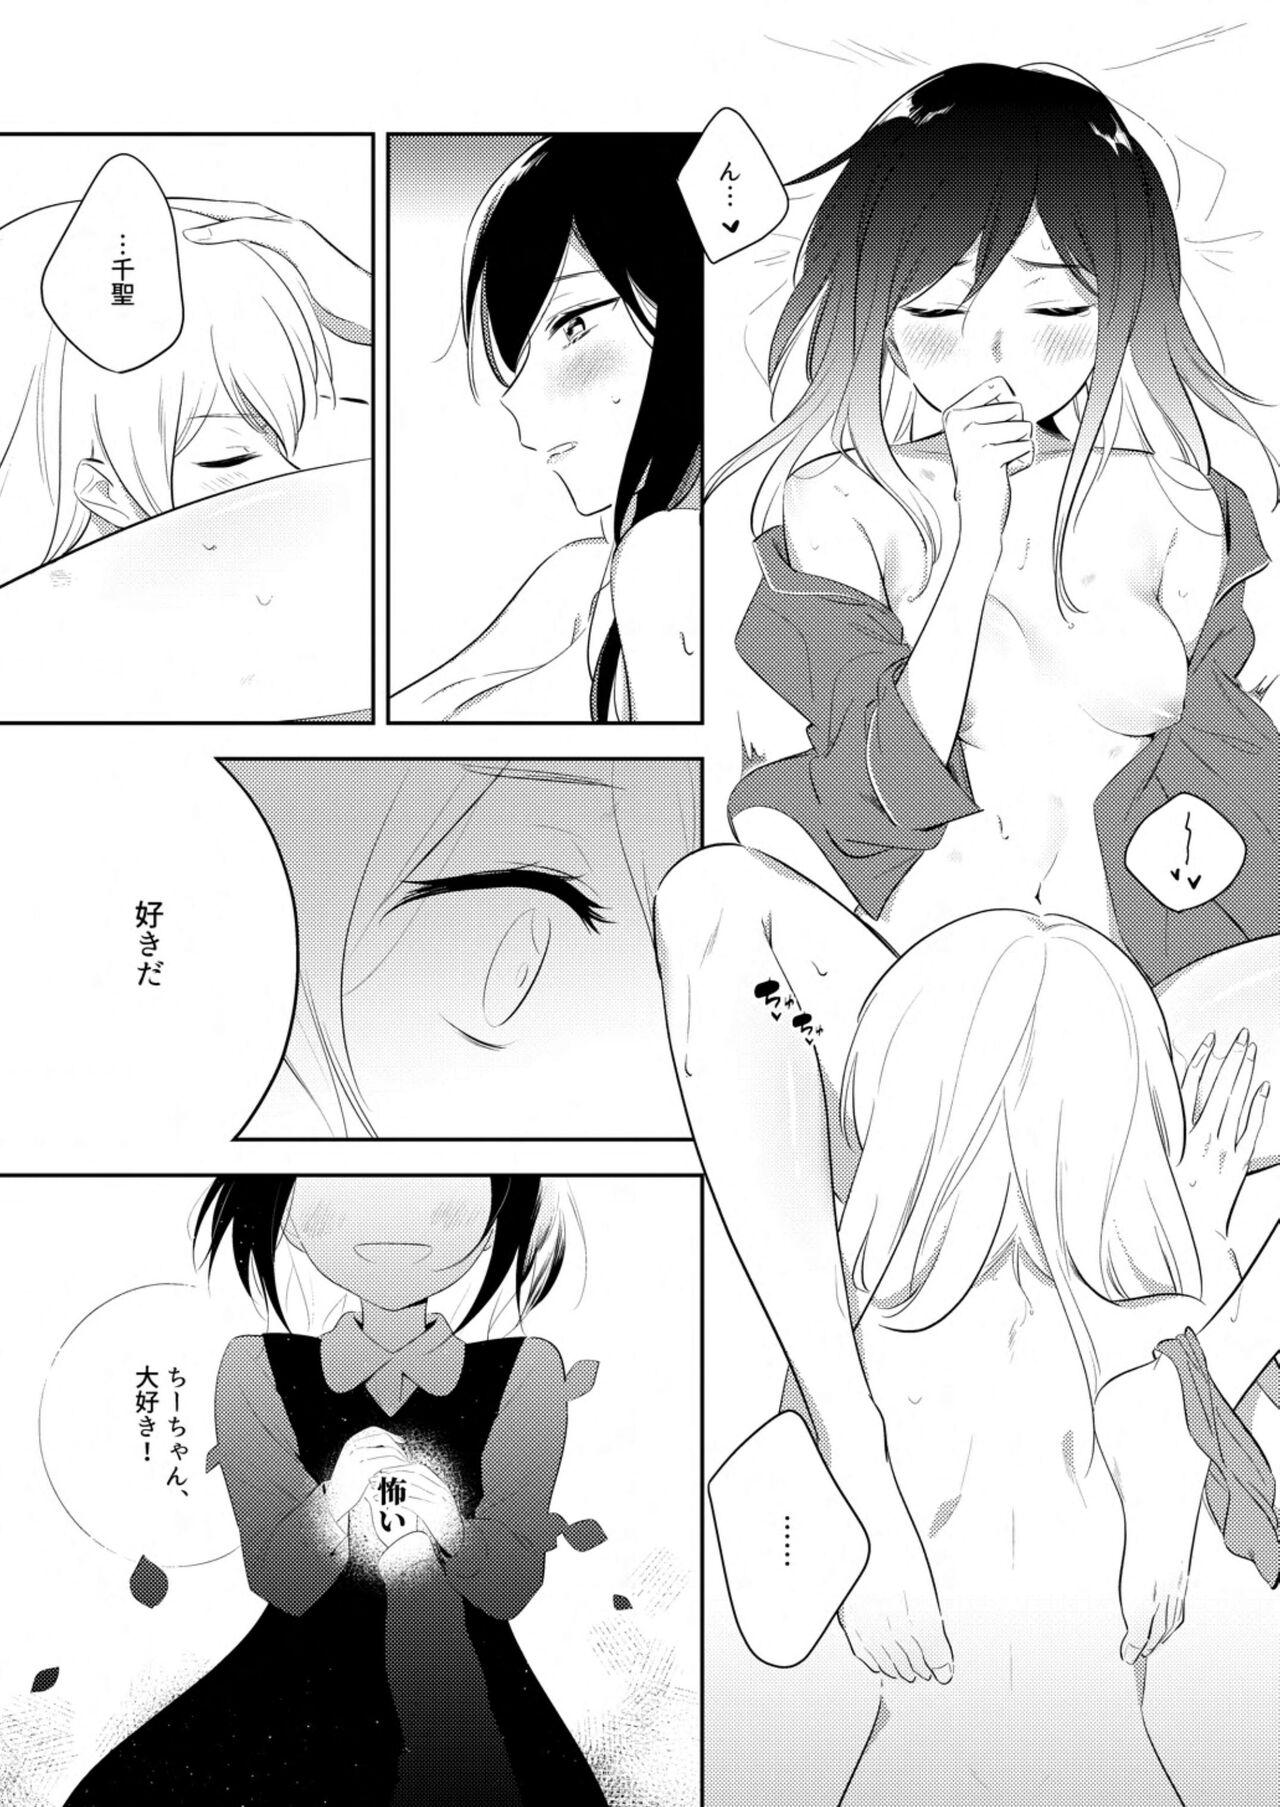 Shesafreak 《By Their Own Beauties》 - Bang dream Real Amateur Porn - Page 9